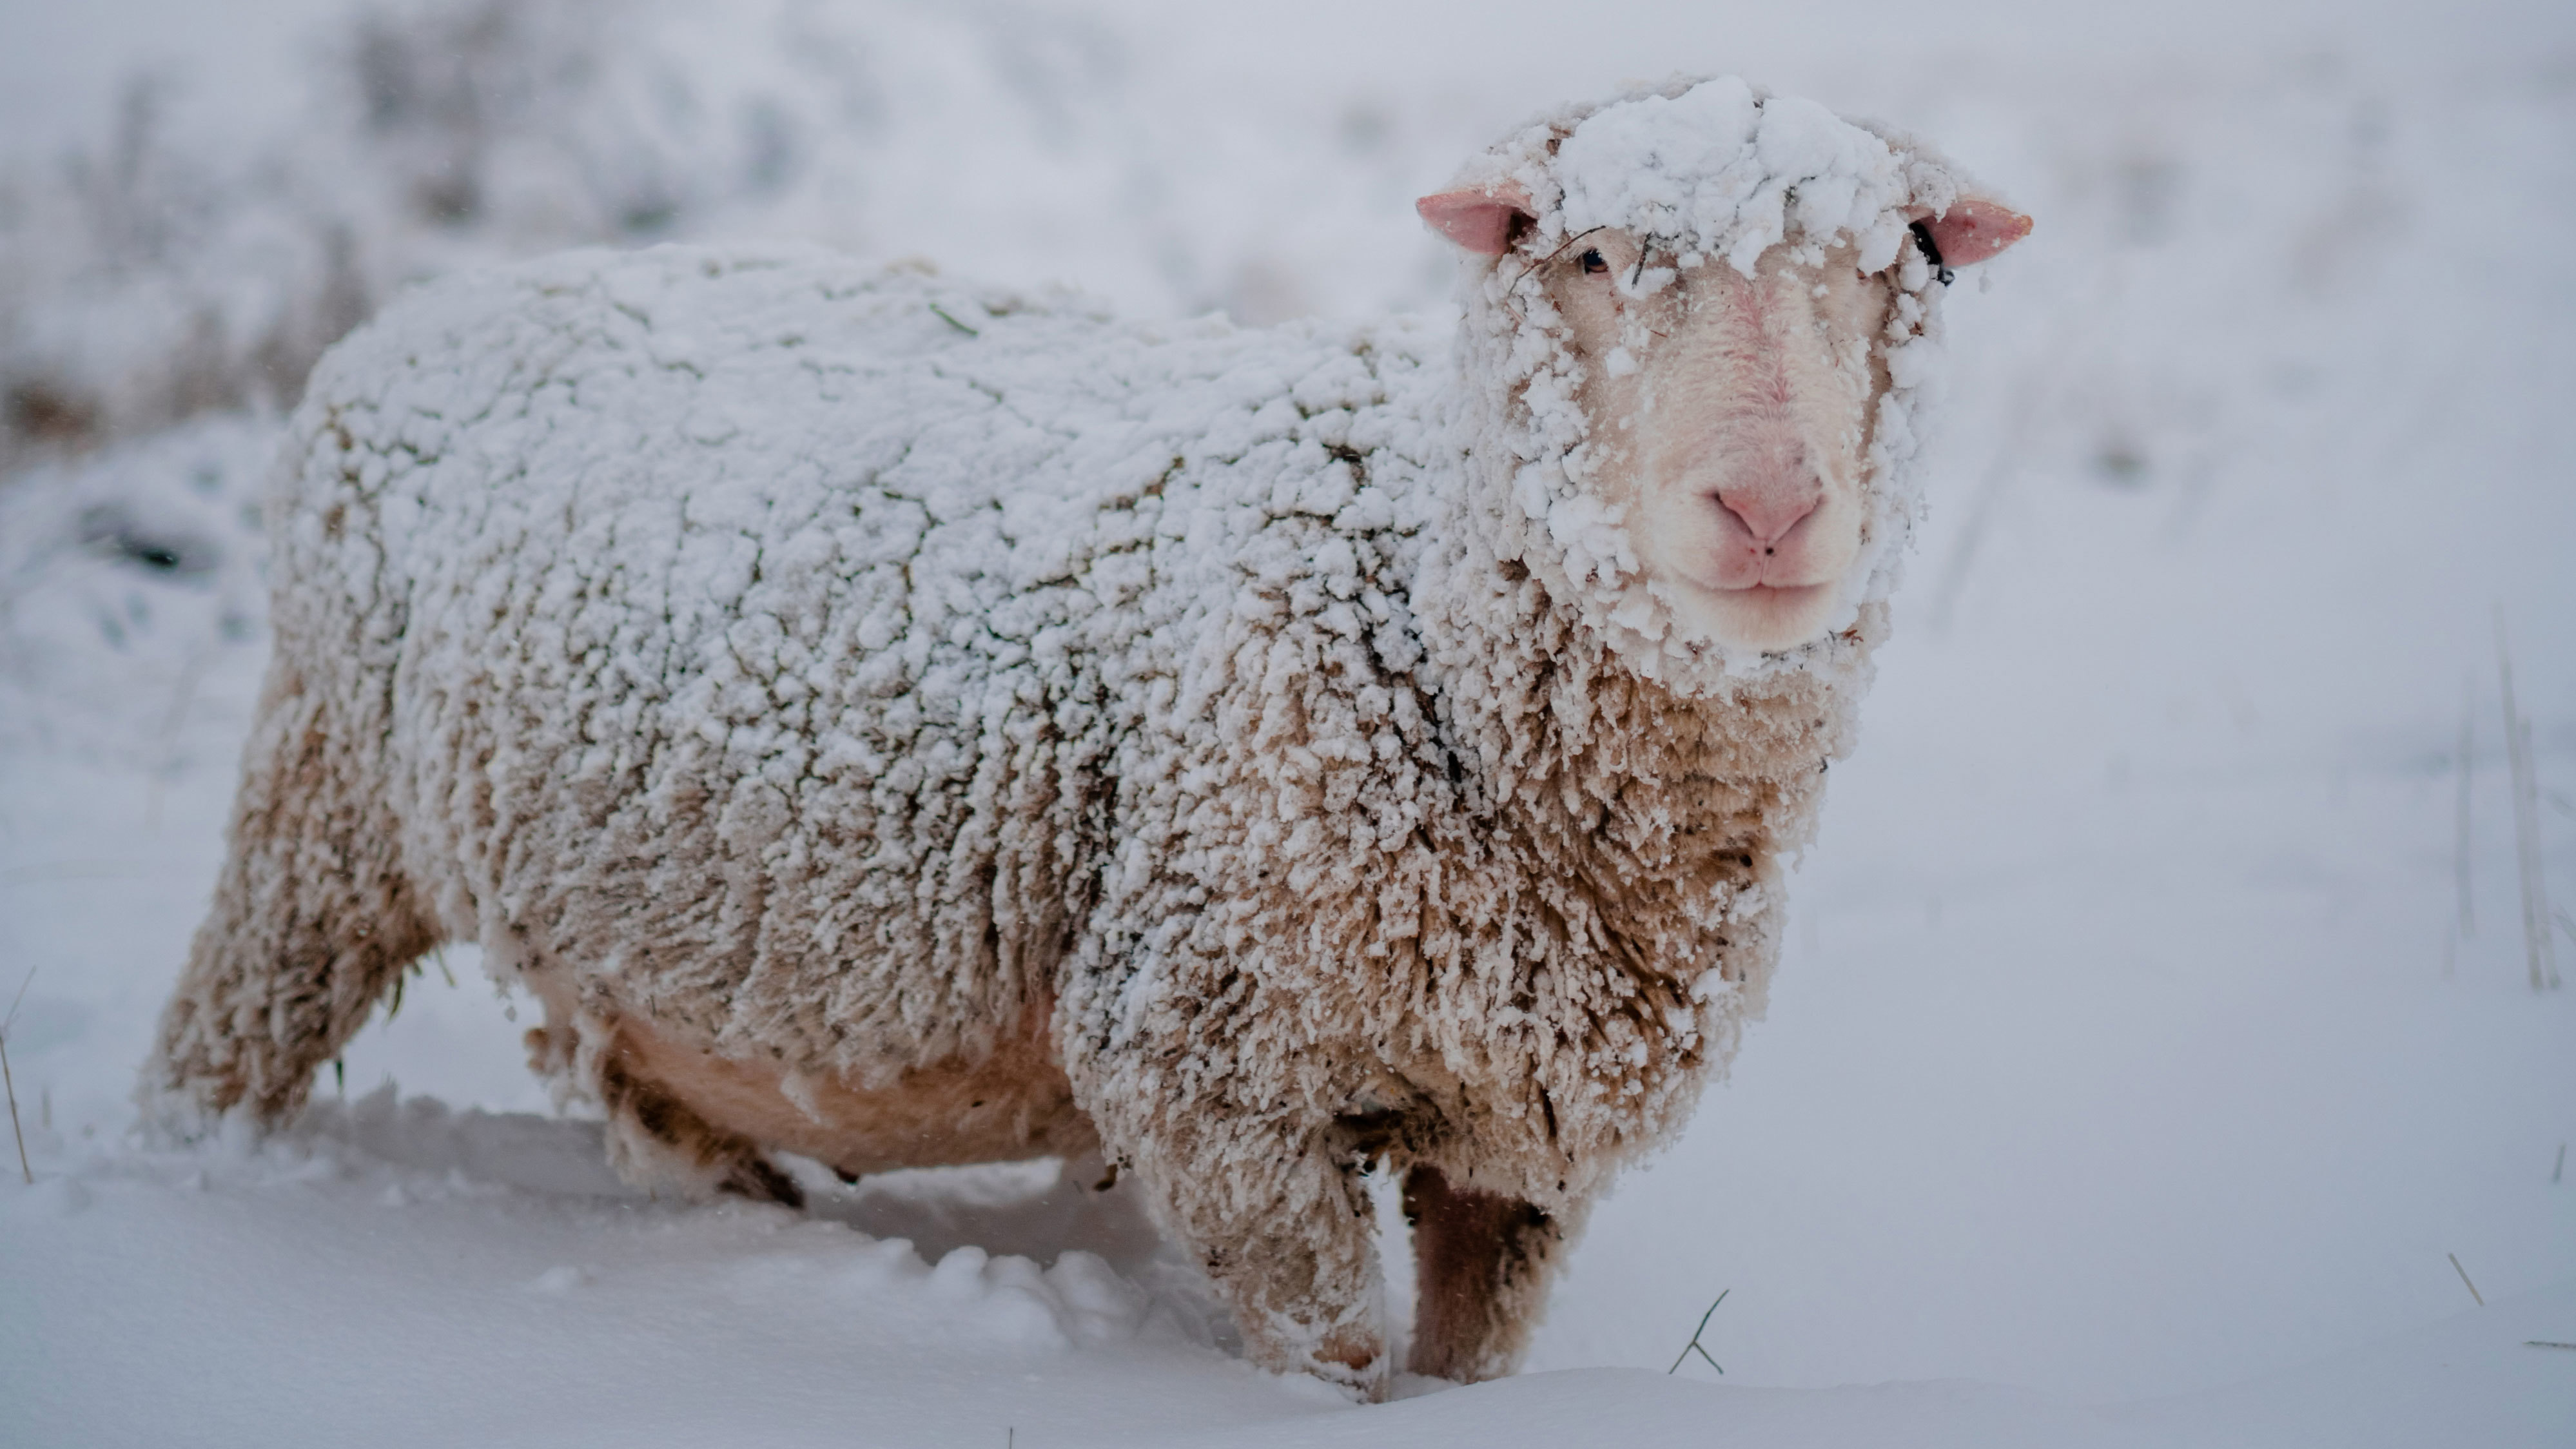 Residents and travellers passing through south eastern Australia were treated to an early snow fall on the weekend. This sheep in Jerangle NSW, between Cooma and Canberra, got more than a dusting of the cold stuff.